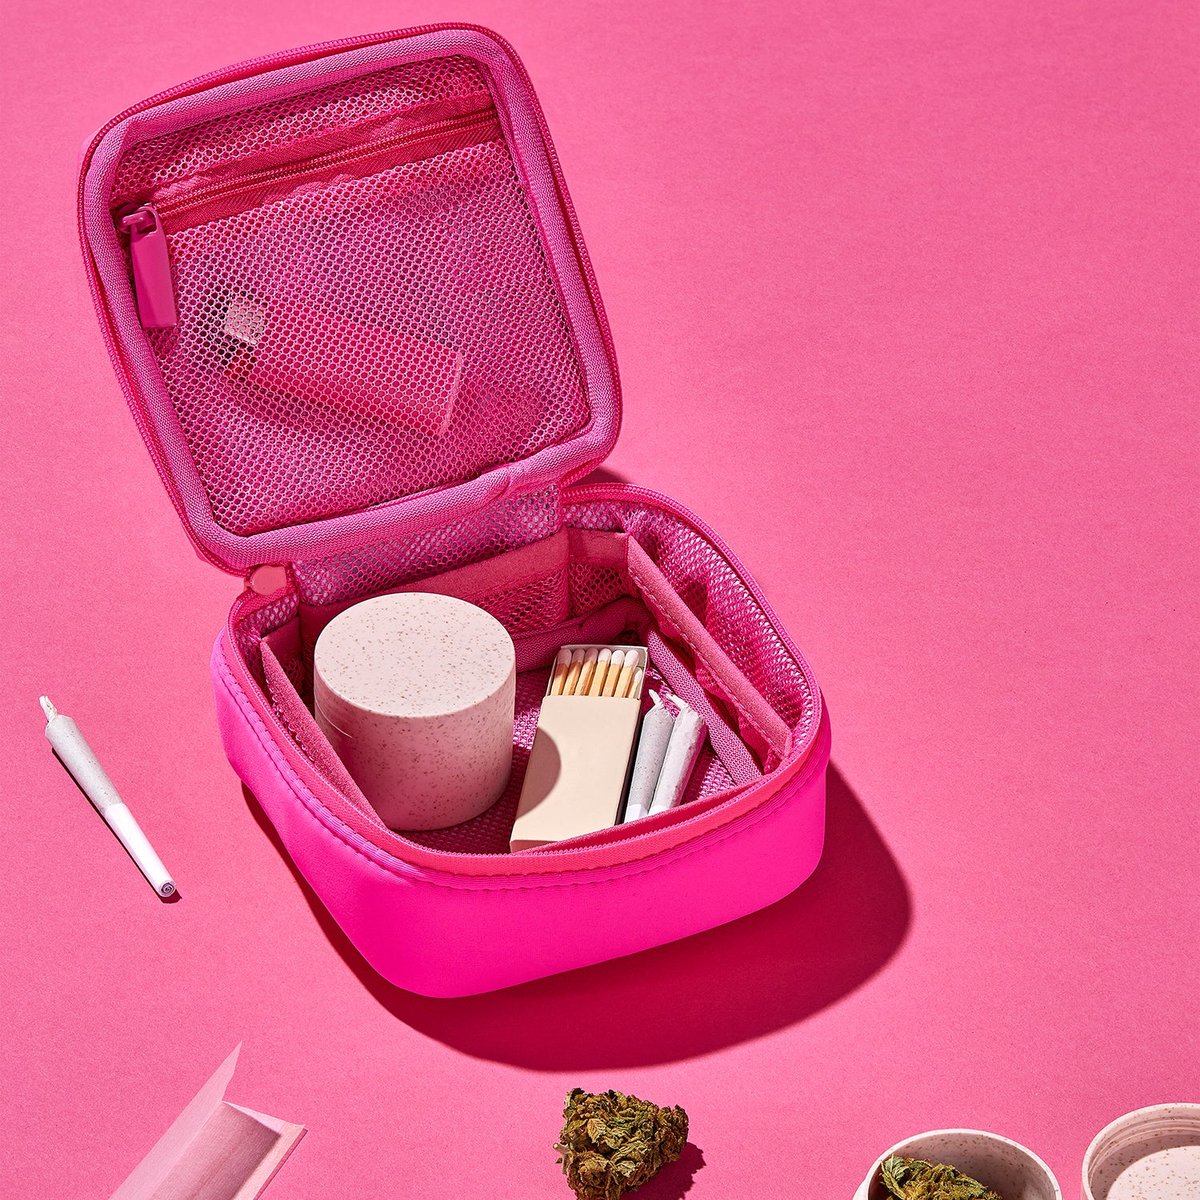 https://images.verishop.com/mytagalongs-smell-proof-cannabis-pouch-must-haves-hot-pink/M00822279043423-1400645041?auto=format&cs=strip&fit=max&w=1200